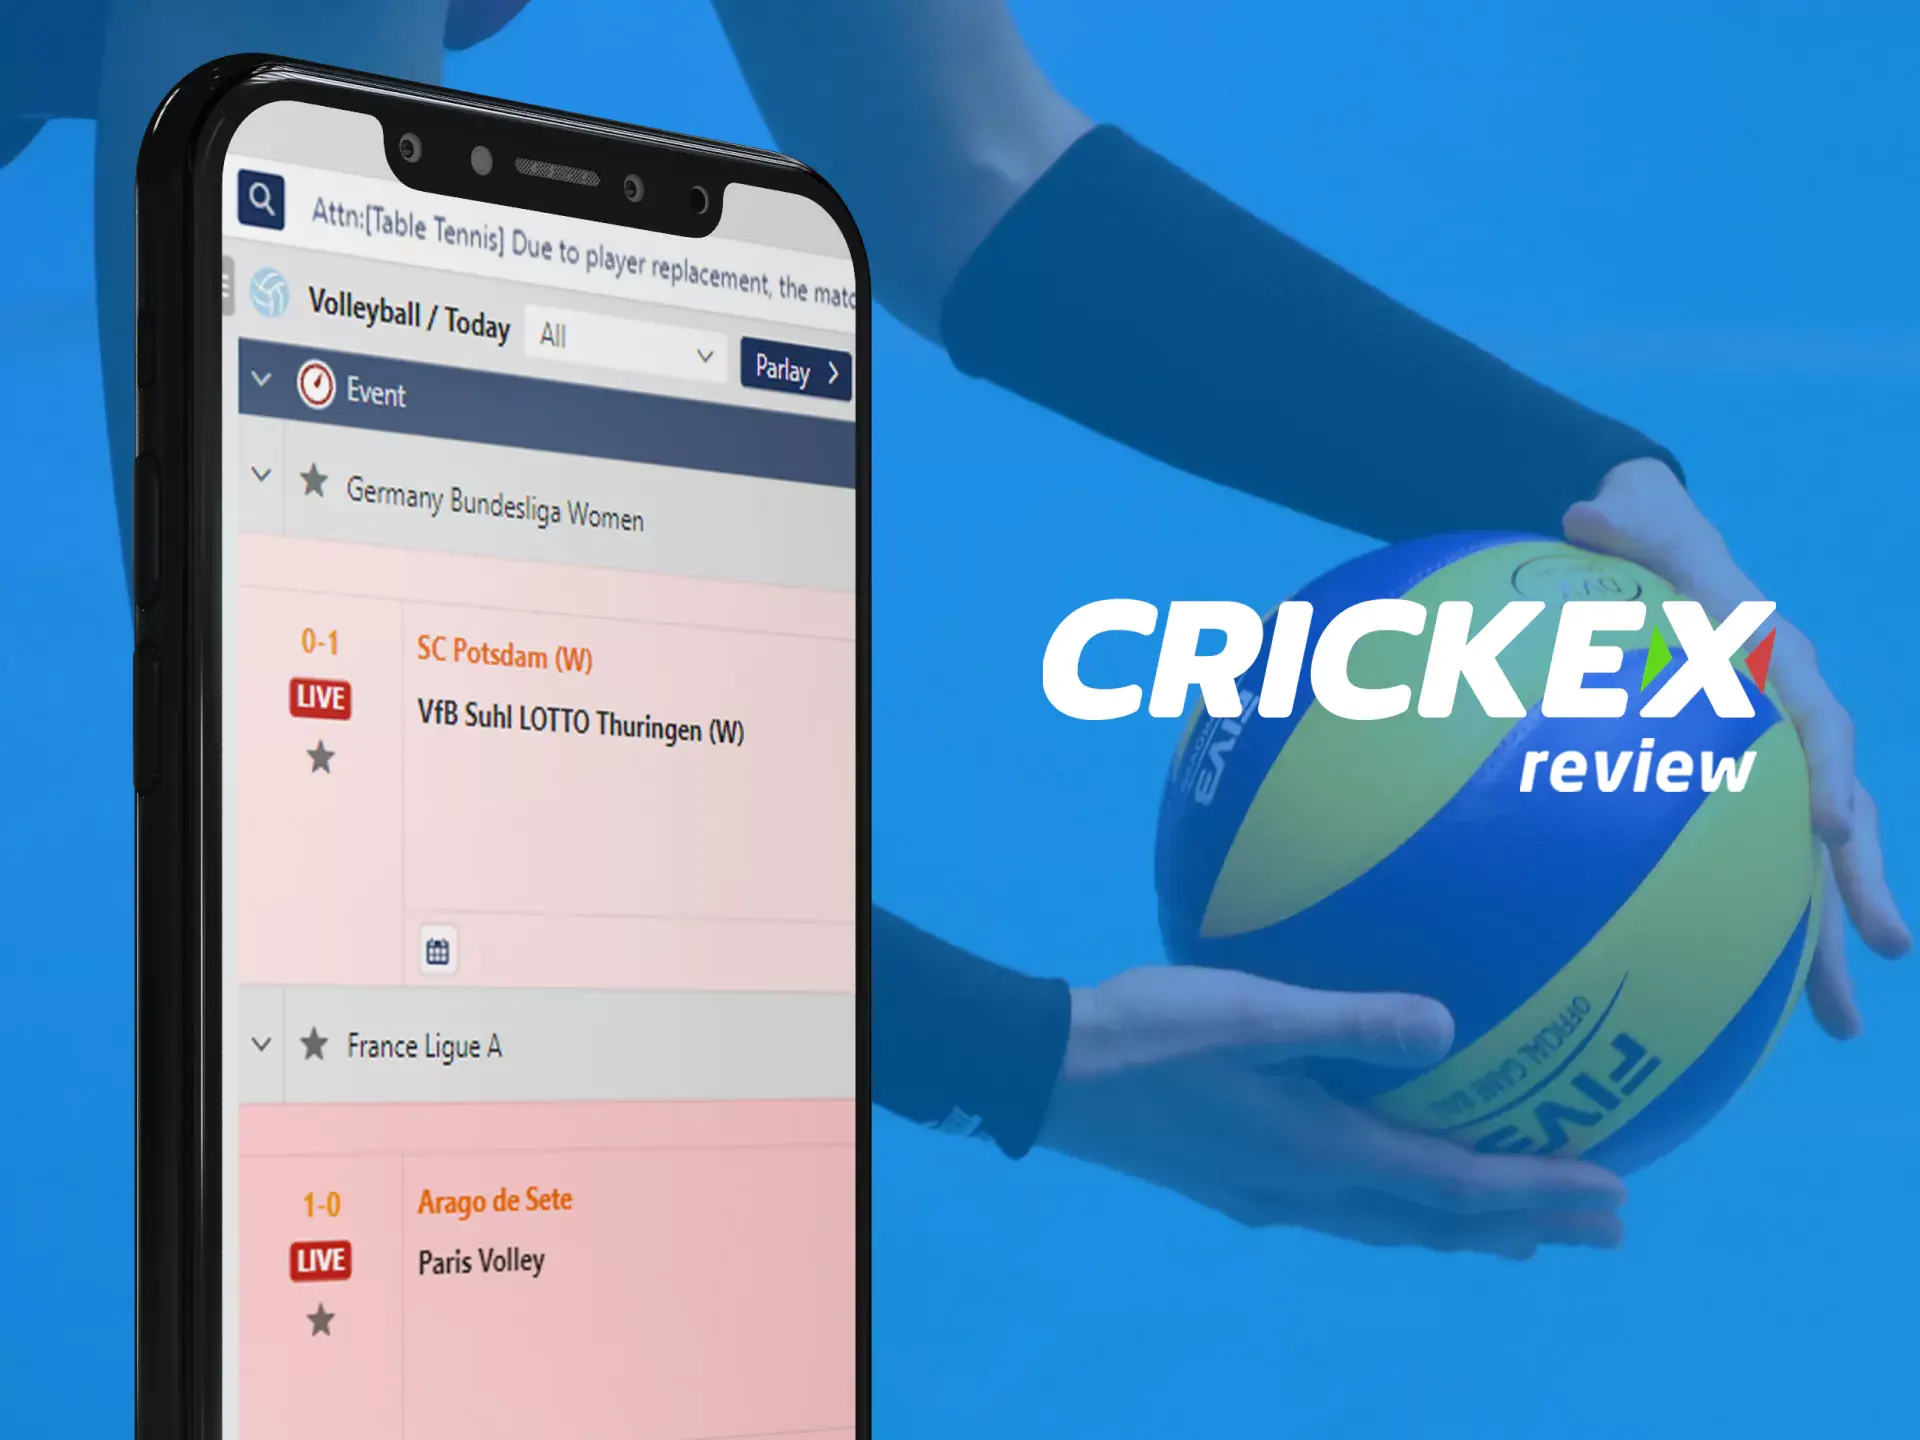 For valleyball betting, you can use Crickex on your phone.